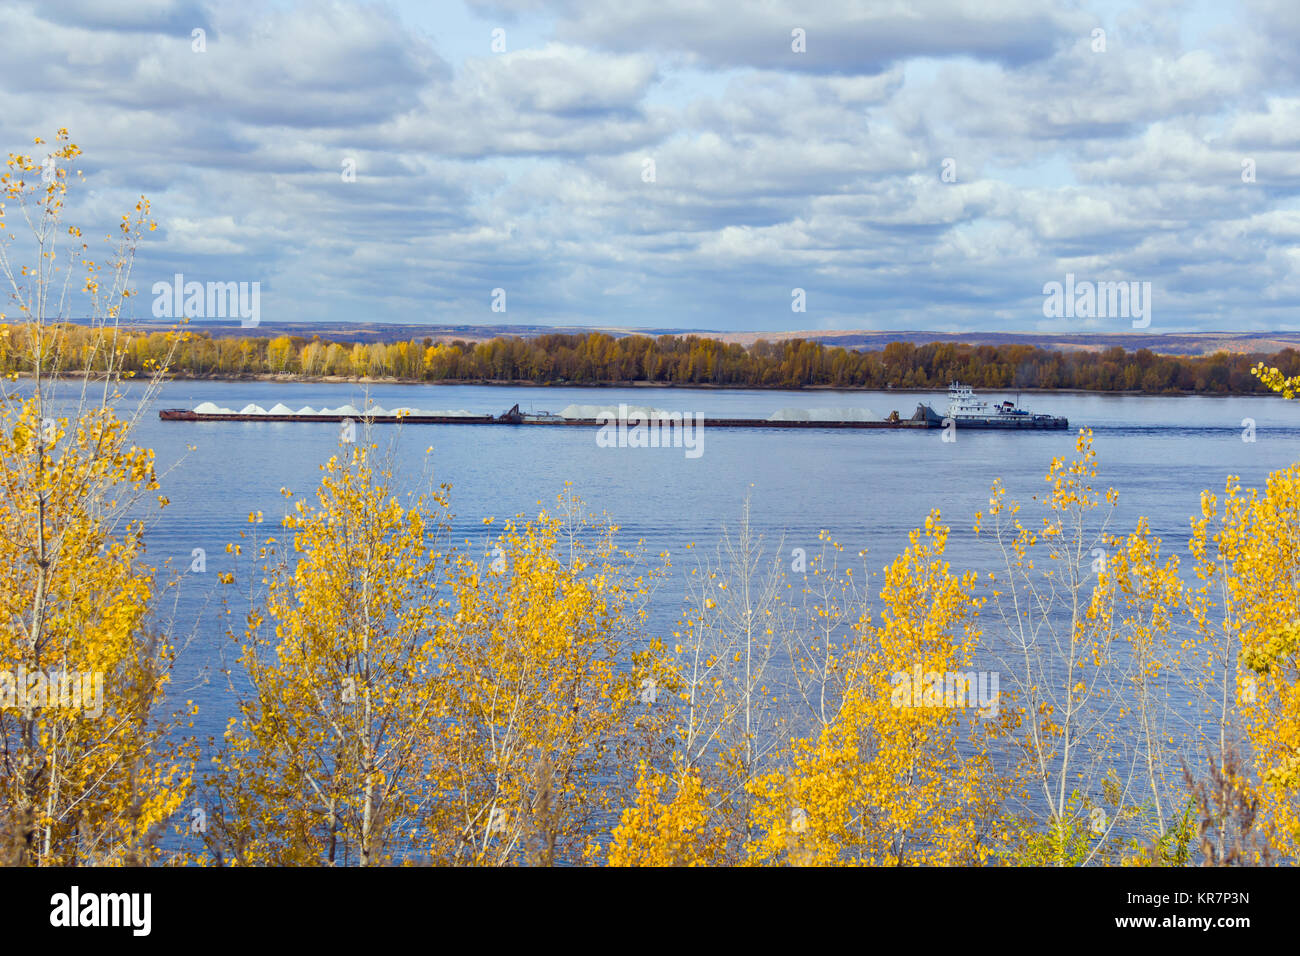 Photo of autumn landscape with barge Stock Photo